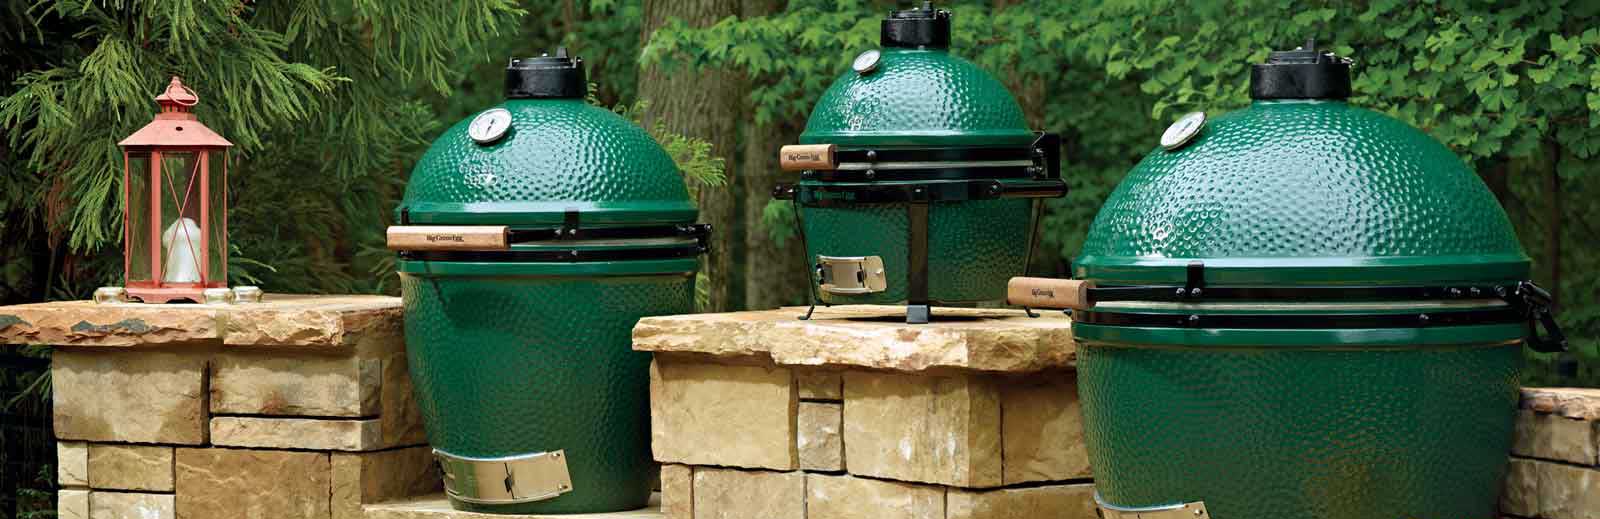 Three Green Egg Smokers sitting on Stone Columns on patio with red lantern to the side and lush greenery in the background